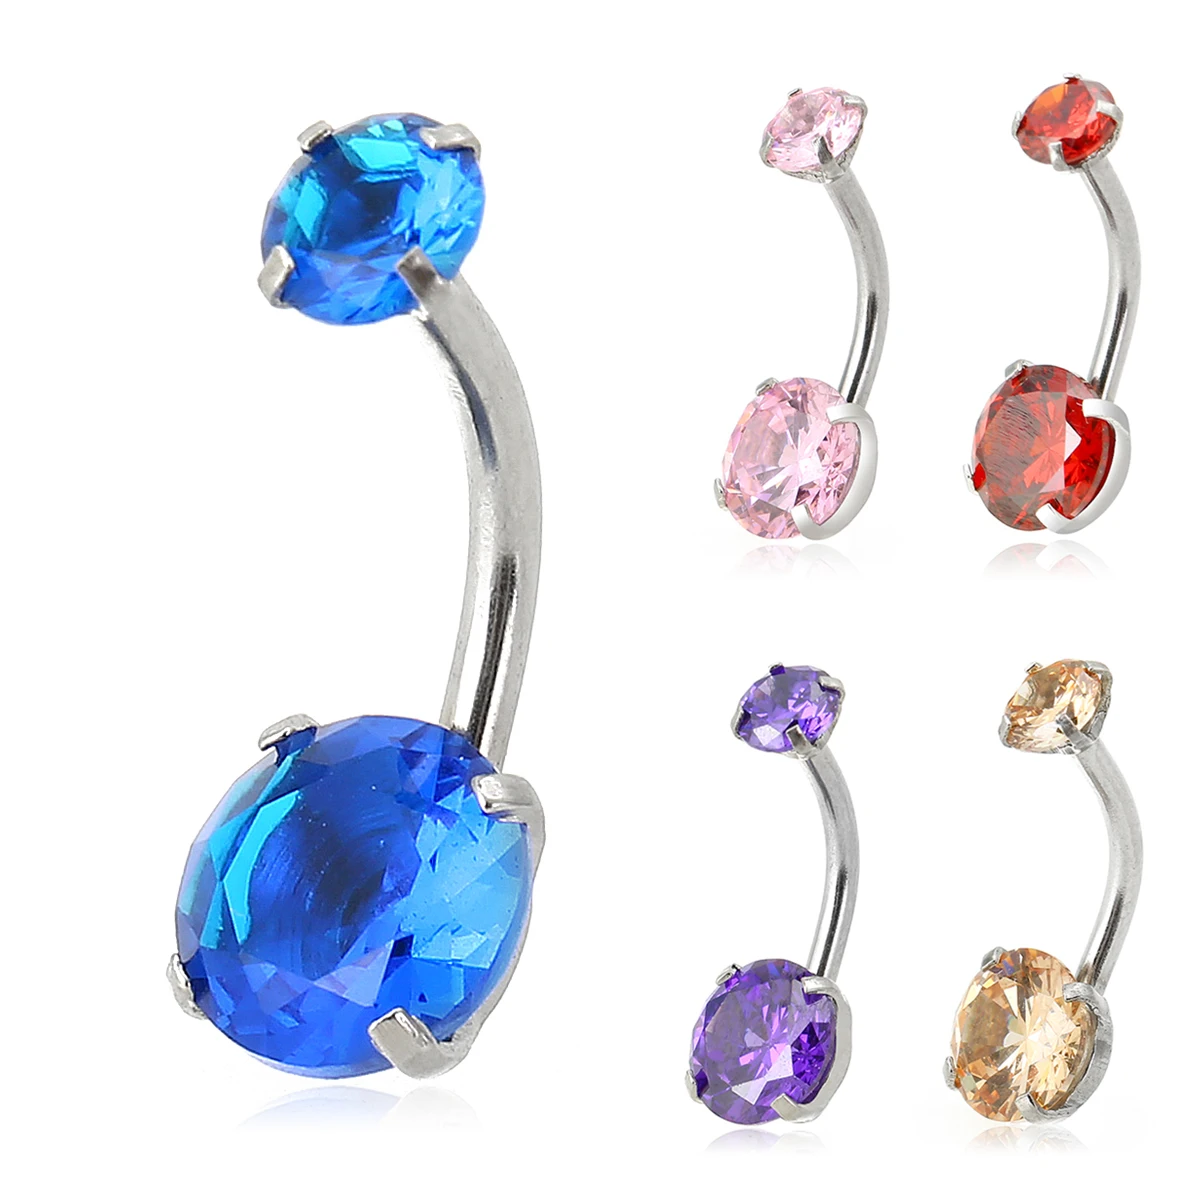 Vintage Double Gem Belly Body Piercing Jewelry Shellhard Stainless Steel Crystal Navel Belly 